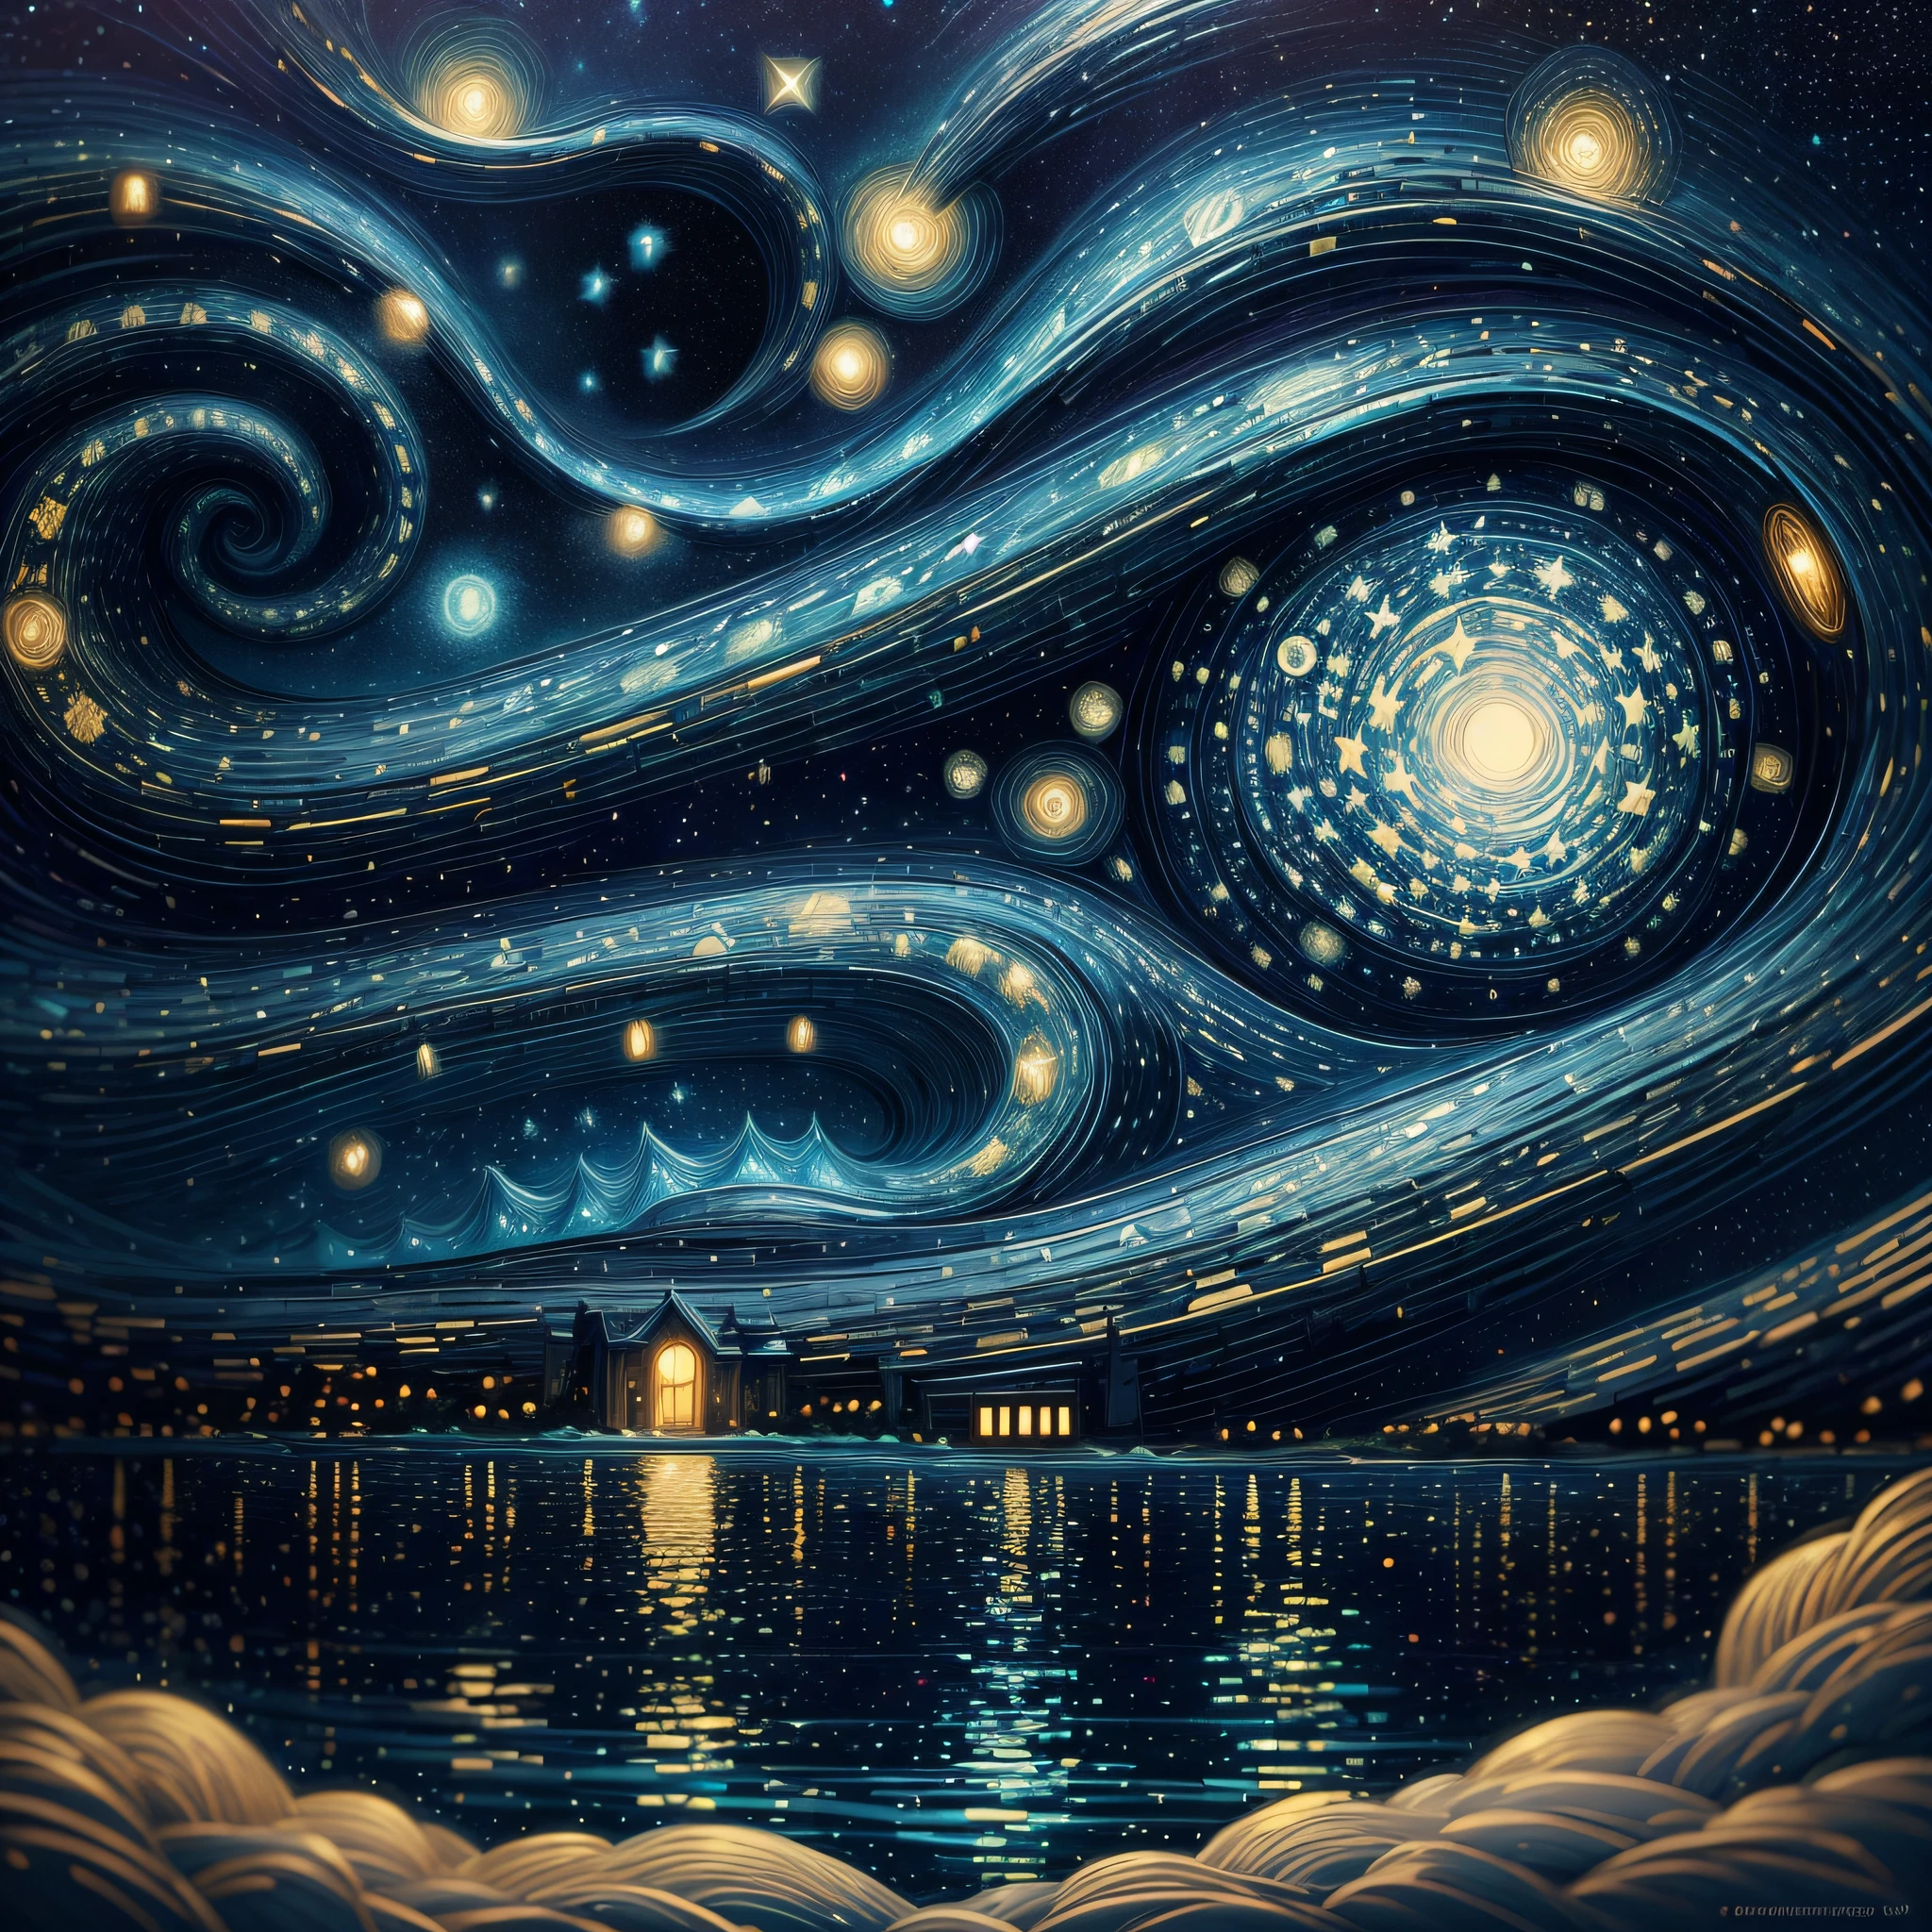 starry night painting of two people in a boat on a lake, james r. eads, van gogh art style, in the starry night, in style of van gogh, style of van gogh, van gogh style, starry night, by Van Gogh, style of van gogh starry night, van gogh painting, anton fadeev and dan mumford, floating among stars --auto --s2